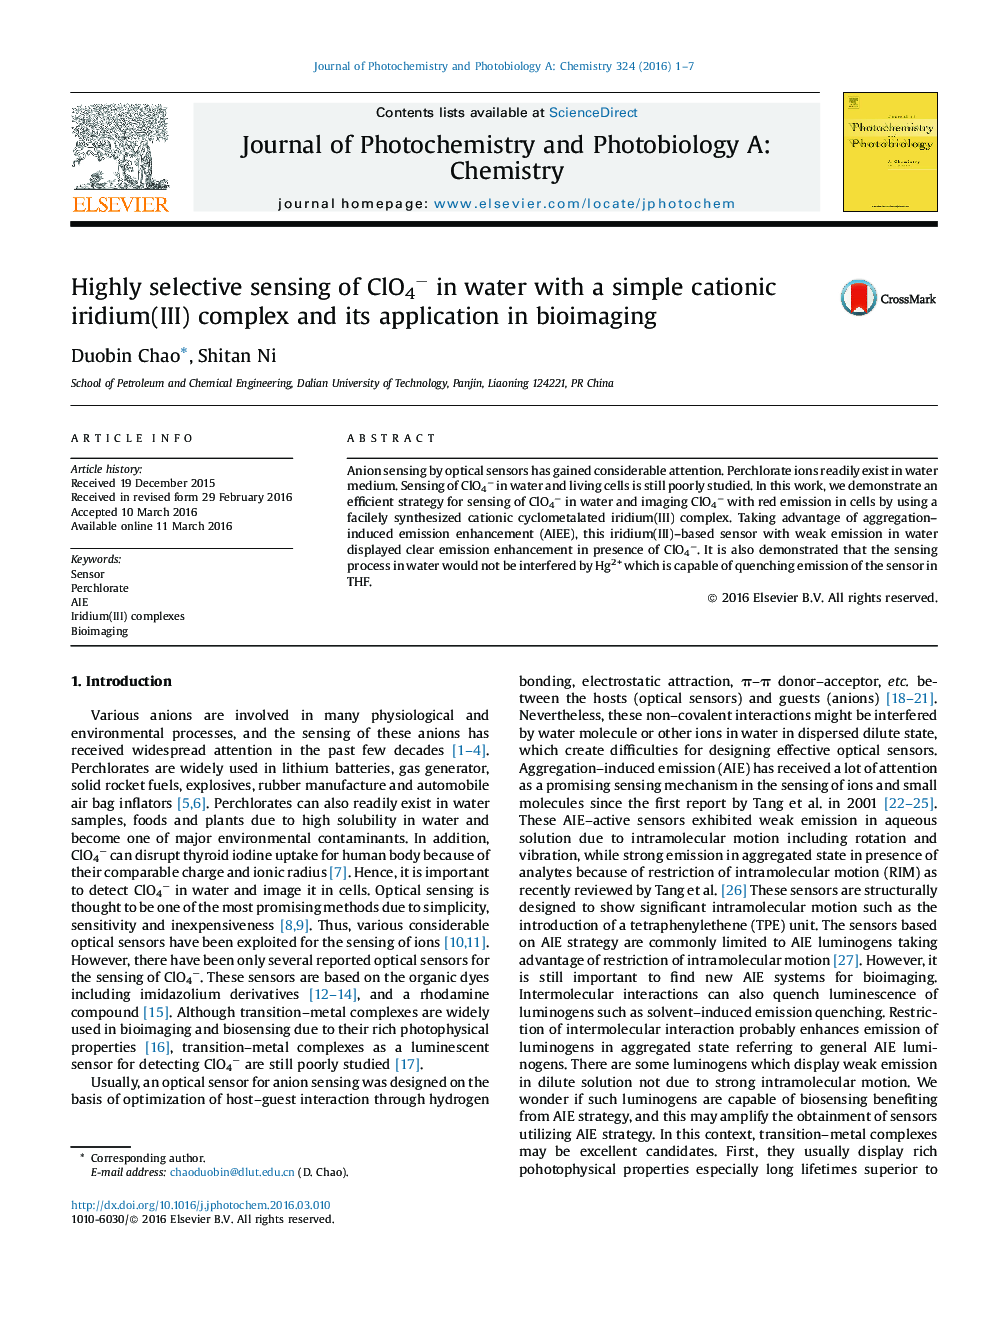 Highly selective sensing of ClO4− in water with a simple cationic iridium(III) complex and its application in bioimaging